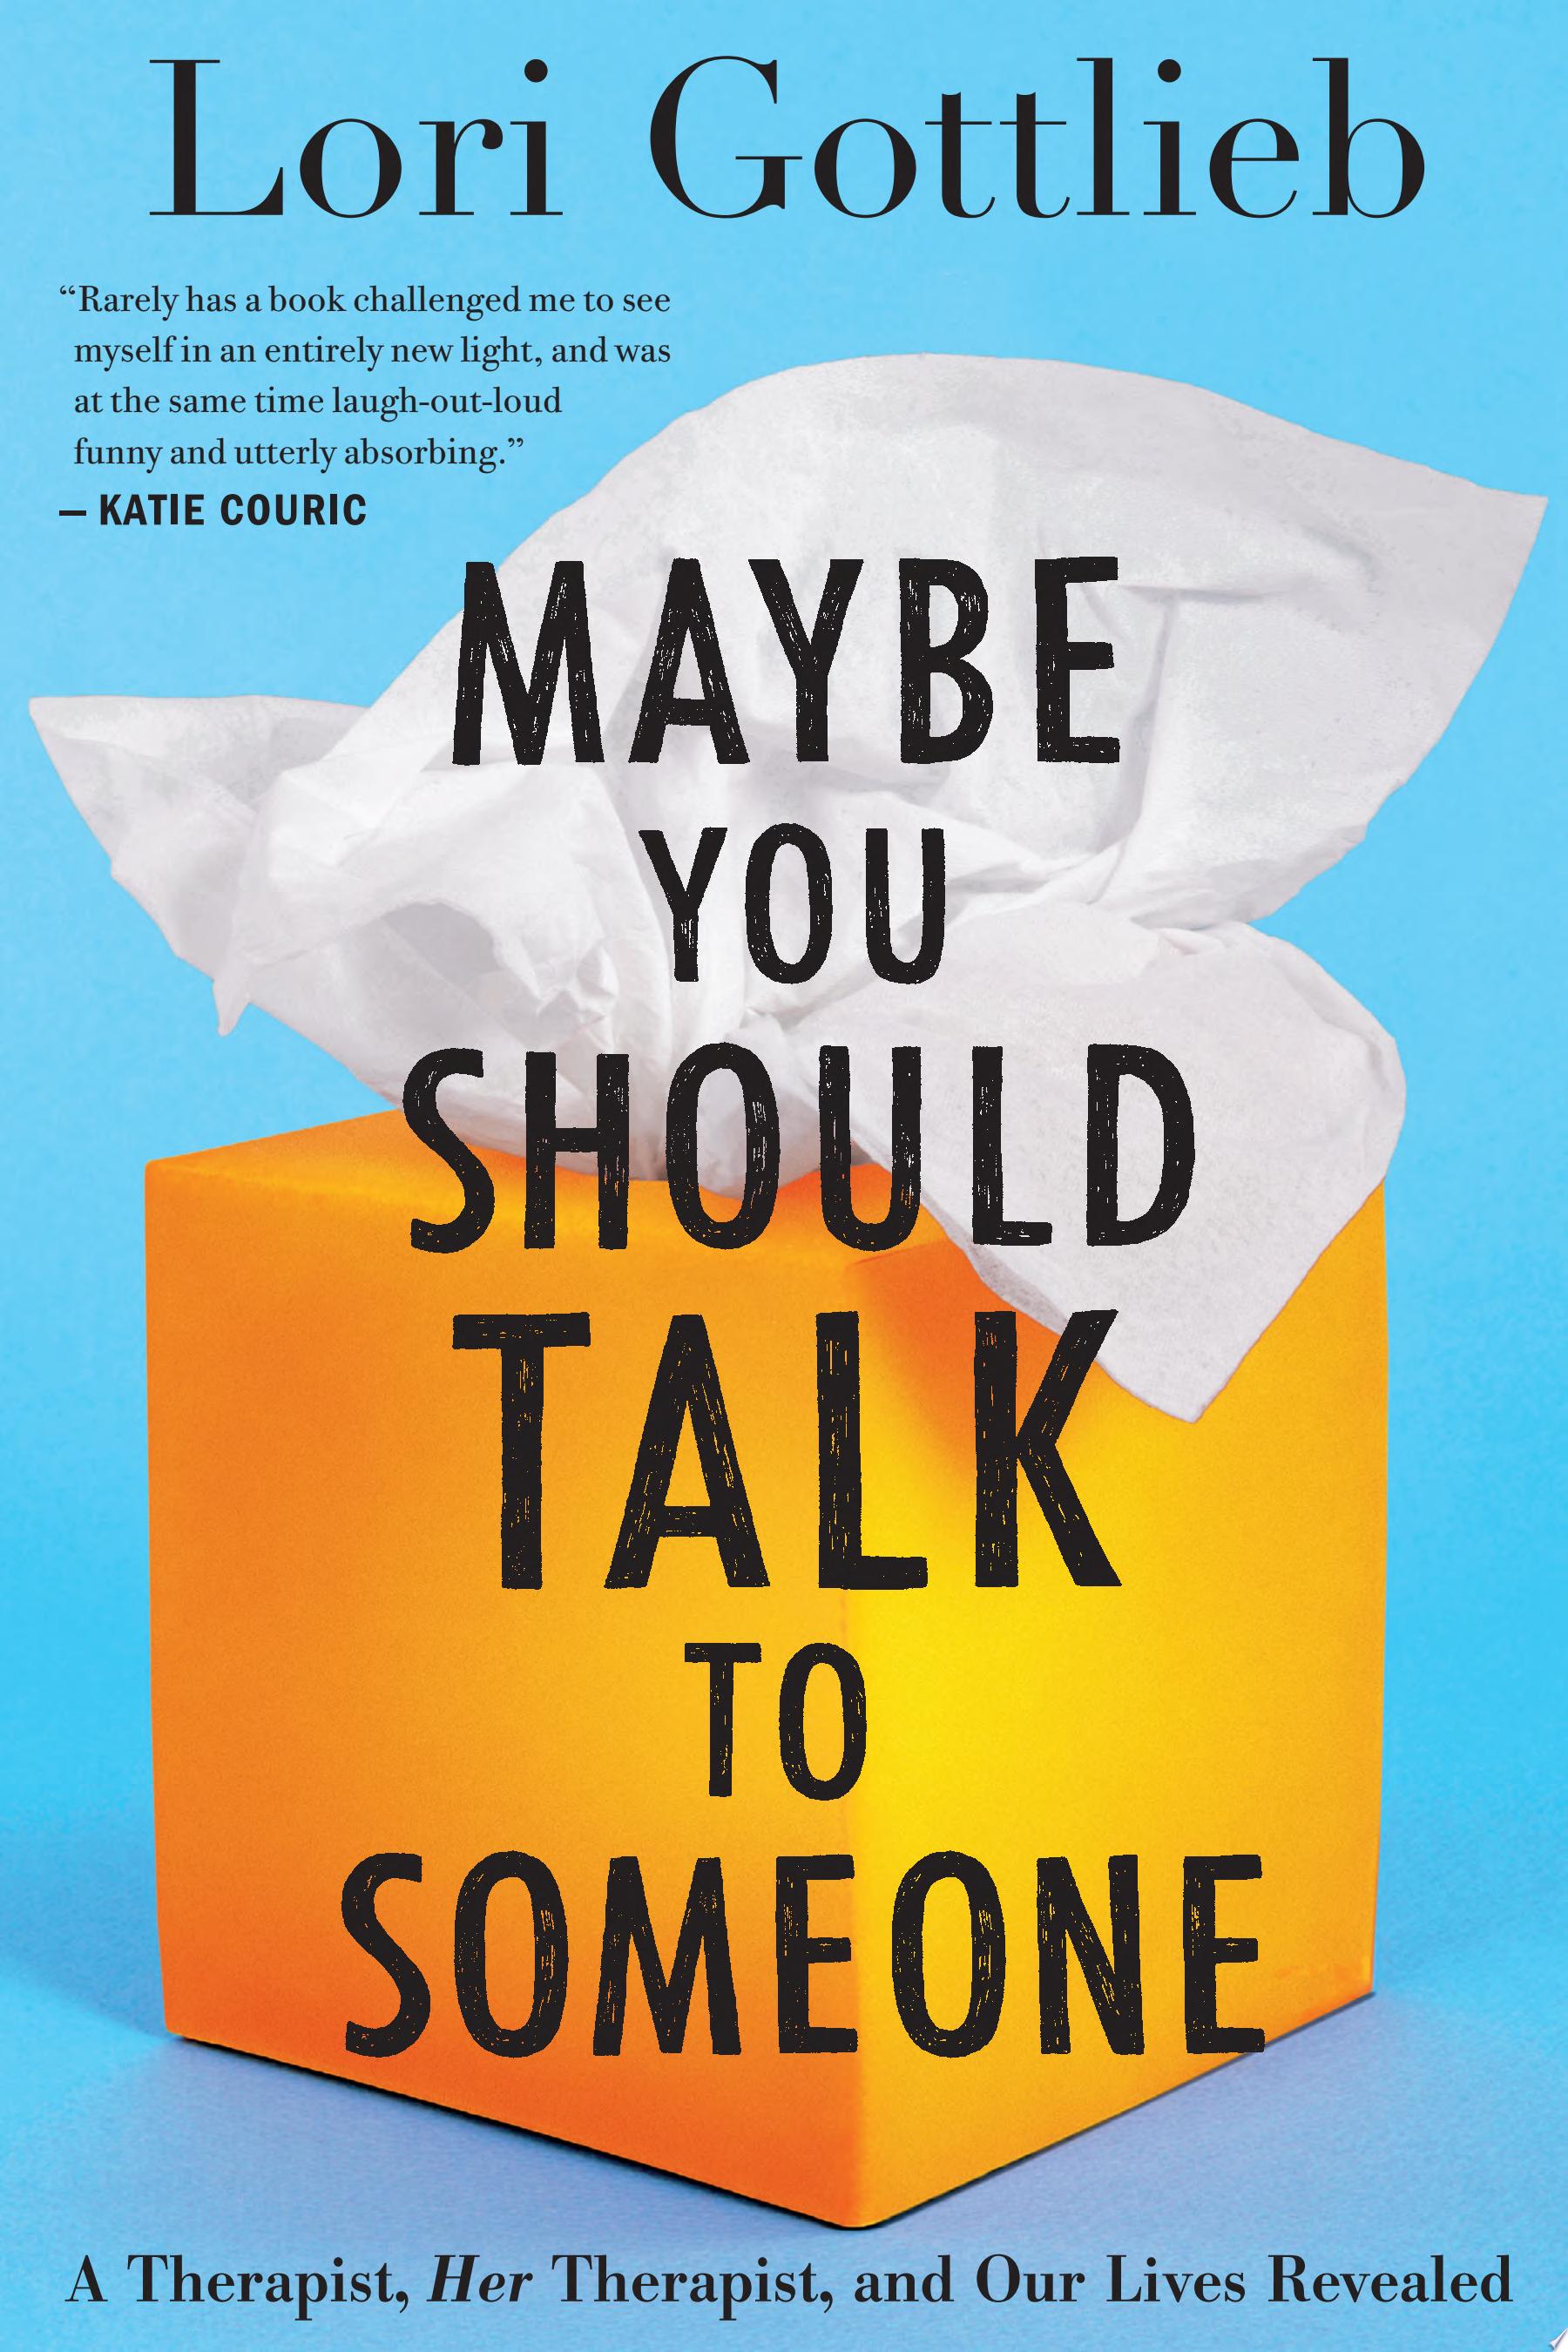 Image for "Maybe You Should Talk to Someone"